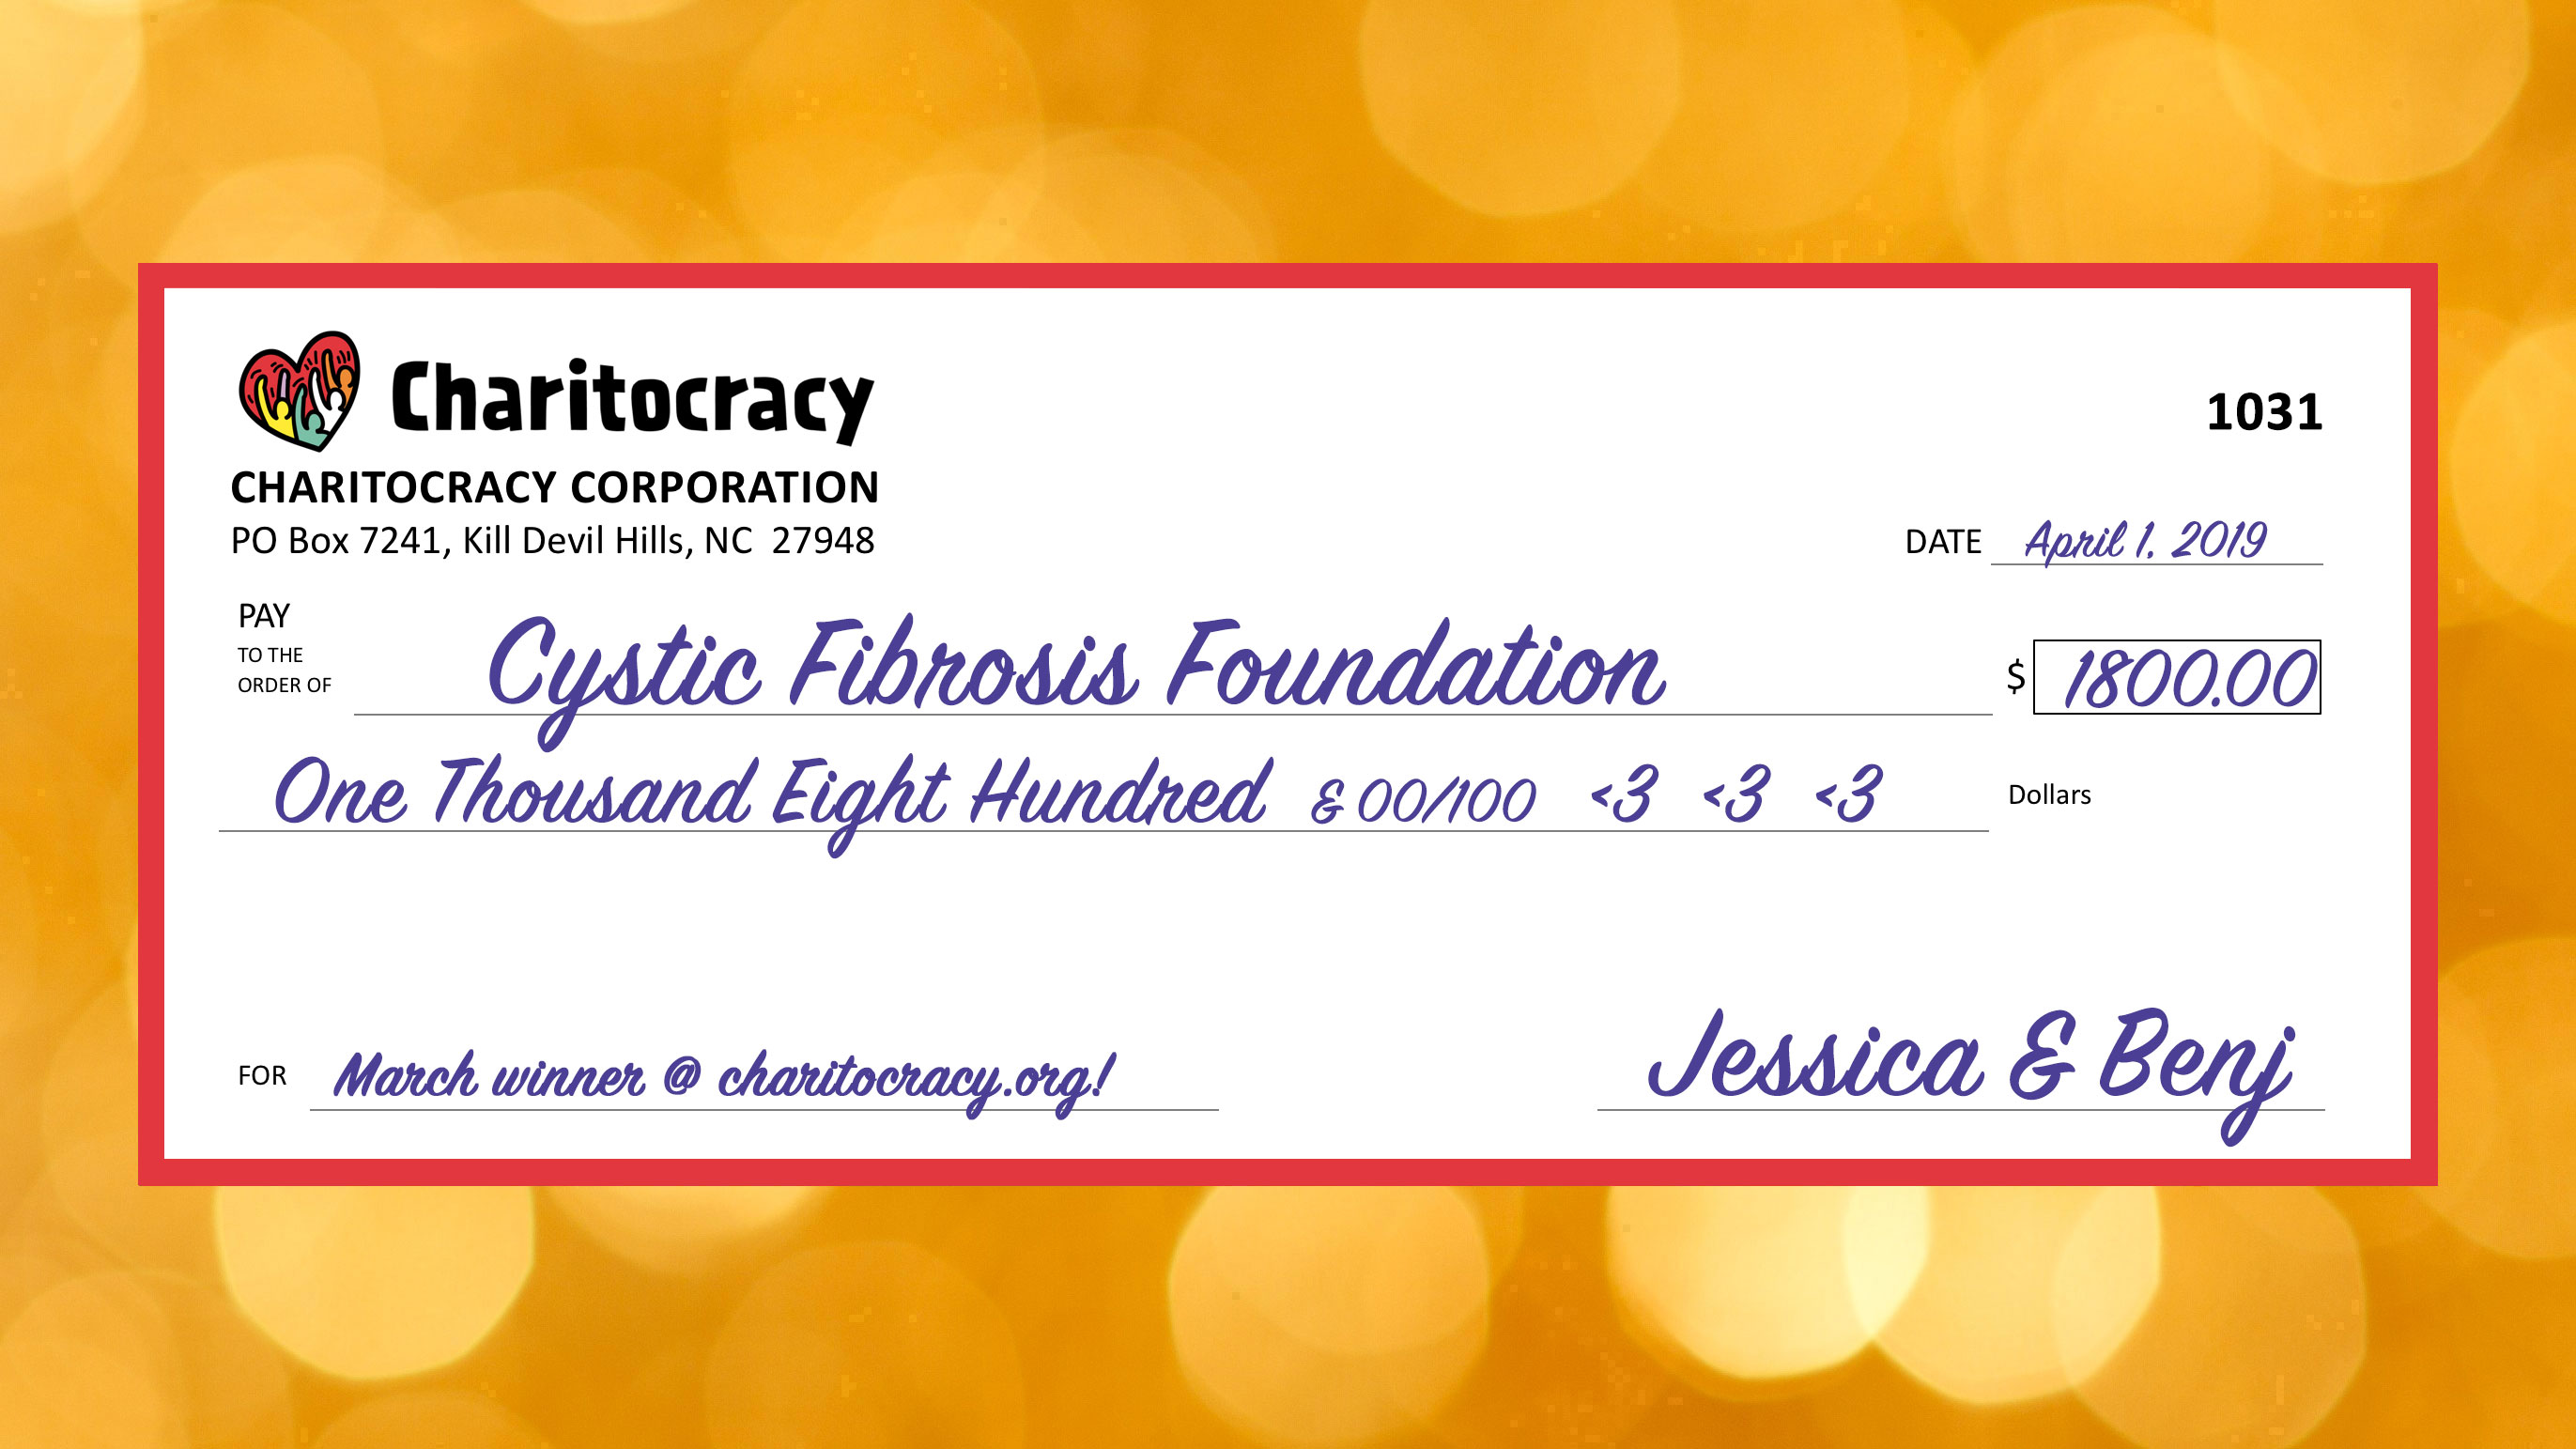 Charitocracy's 31st check to March winner Cystic Fibrosis Foundation for $1800